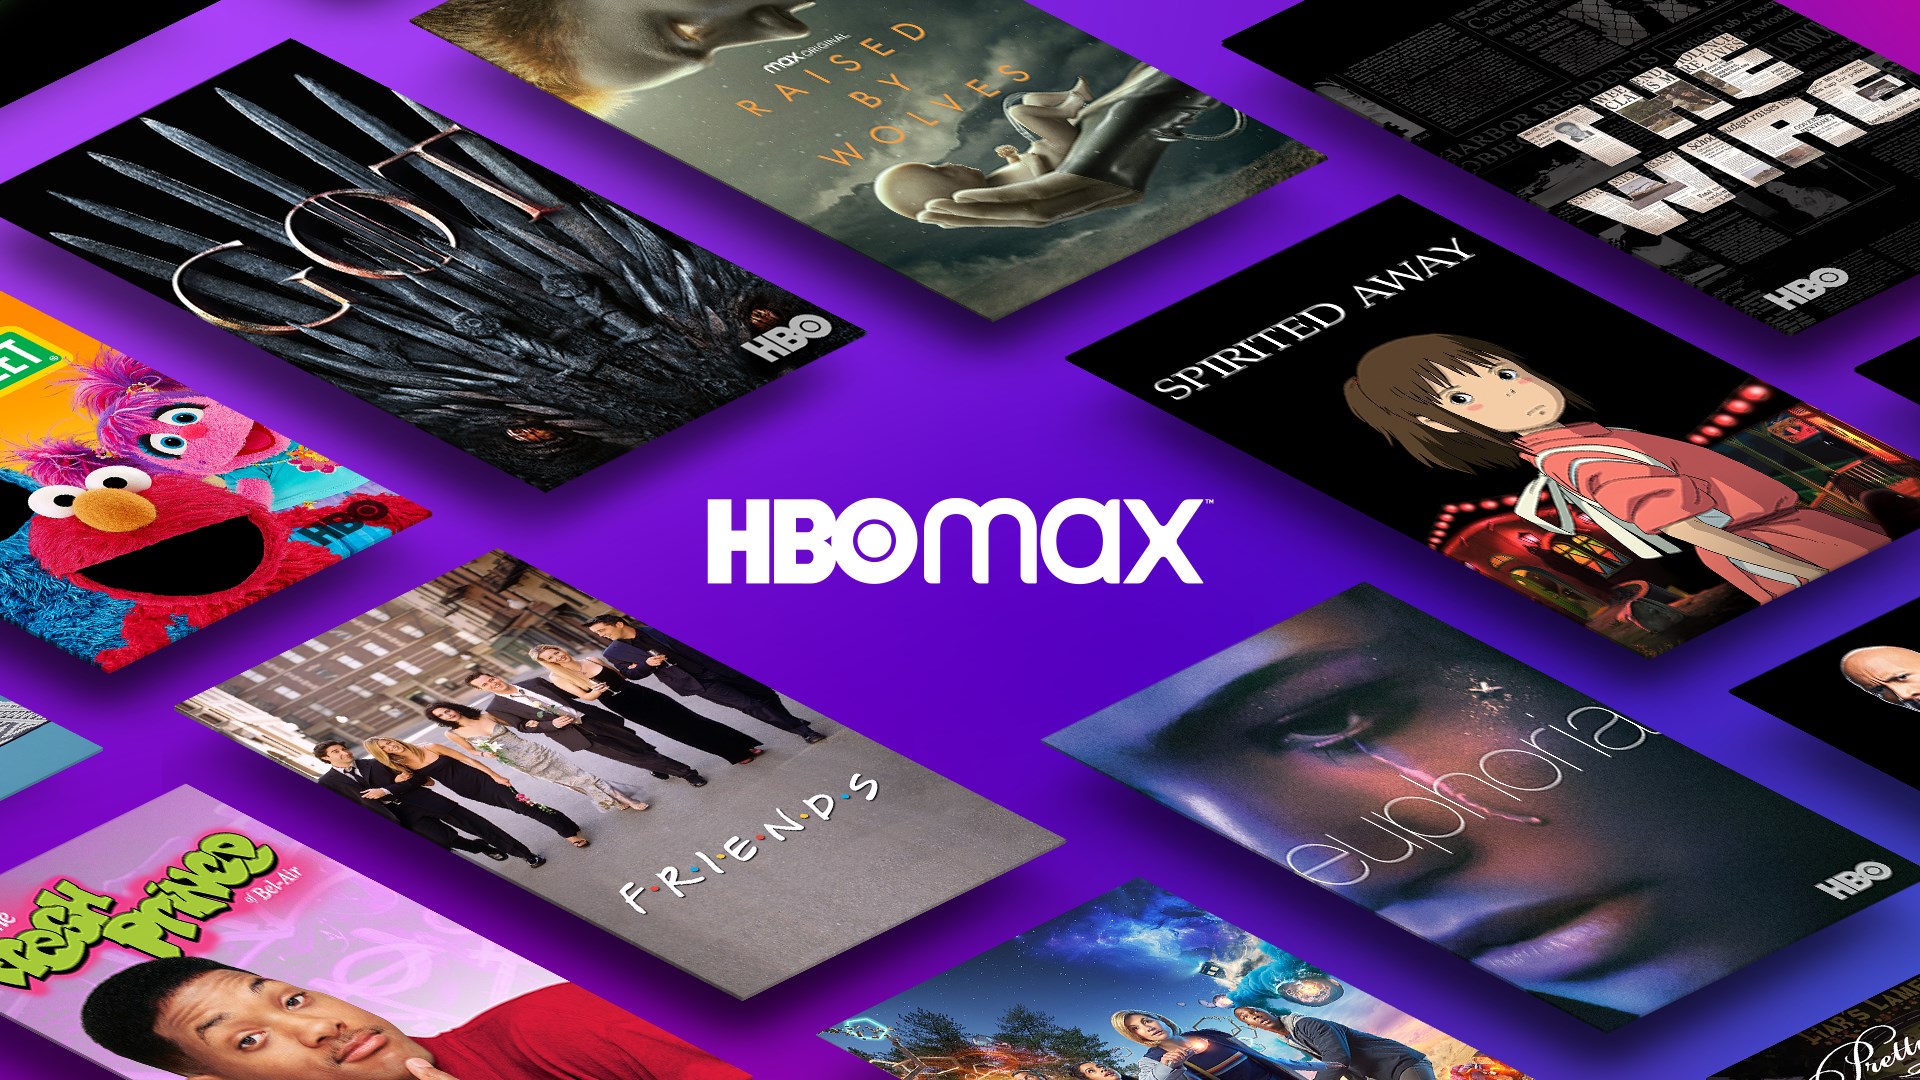 is hbo max on xbox one